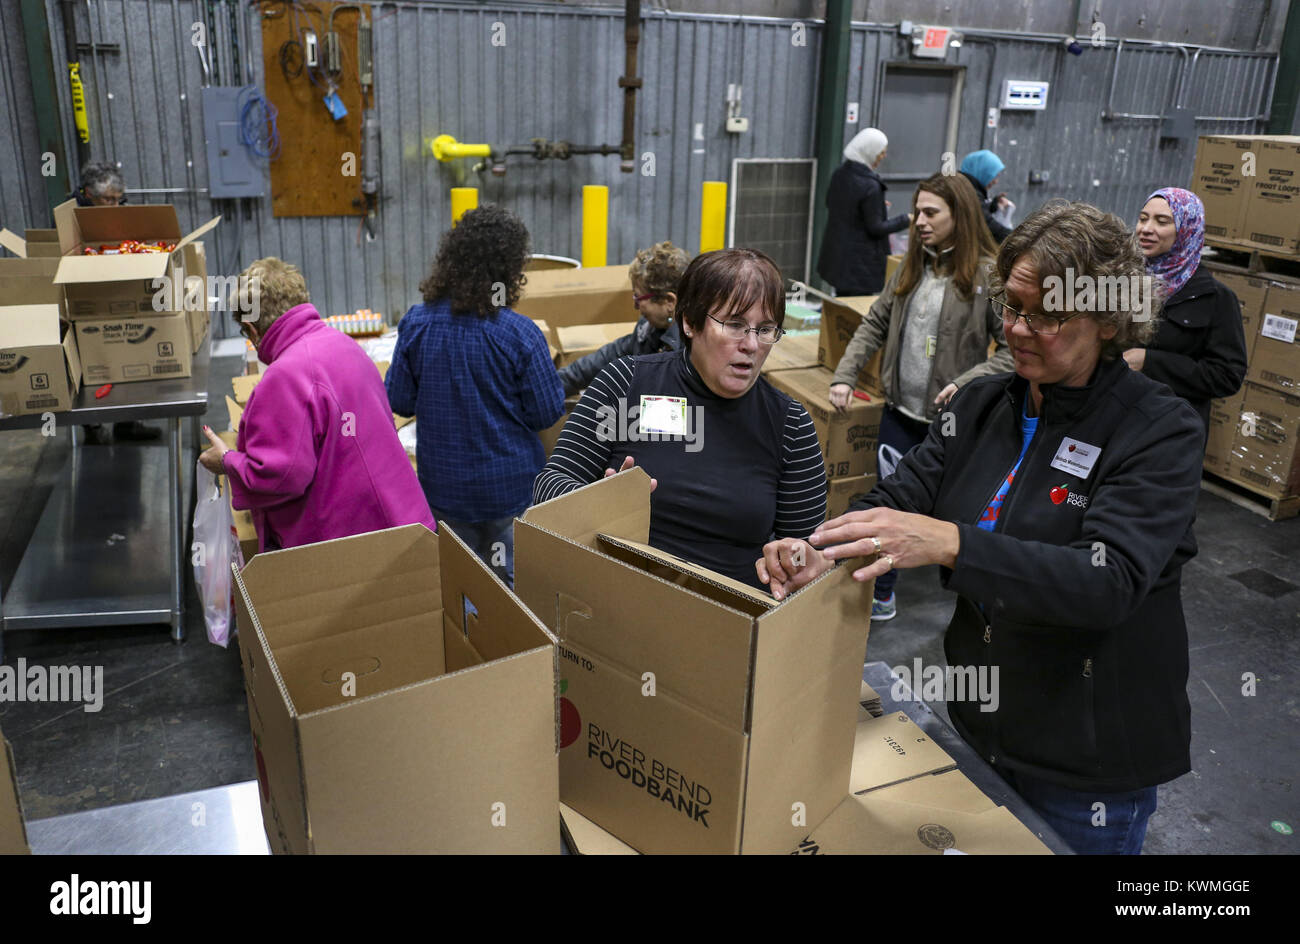 Davenport, Iowa, USA. 4th Dec, 2017. Chapter Leader Gail Karp Volunteer Coordinator Belinda Mielenhausen fold a box together to put bags of food for local students in at River Bend Foodbank in Davenport on Monday, December 4, 2017. The local chapter of the Sisterhood of Salaam Shalom took part in a national event showing solidarity by bringing American Jewish and Muslim women together to perform acts of charity together as a part of National Sadaqah-Tzedakah Day. The chapter chose to focus on hunger insecurity as their focus for this year's project and worked to pack bags of food for kid Stock Photo